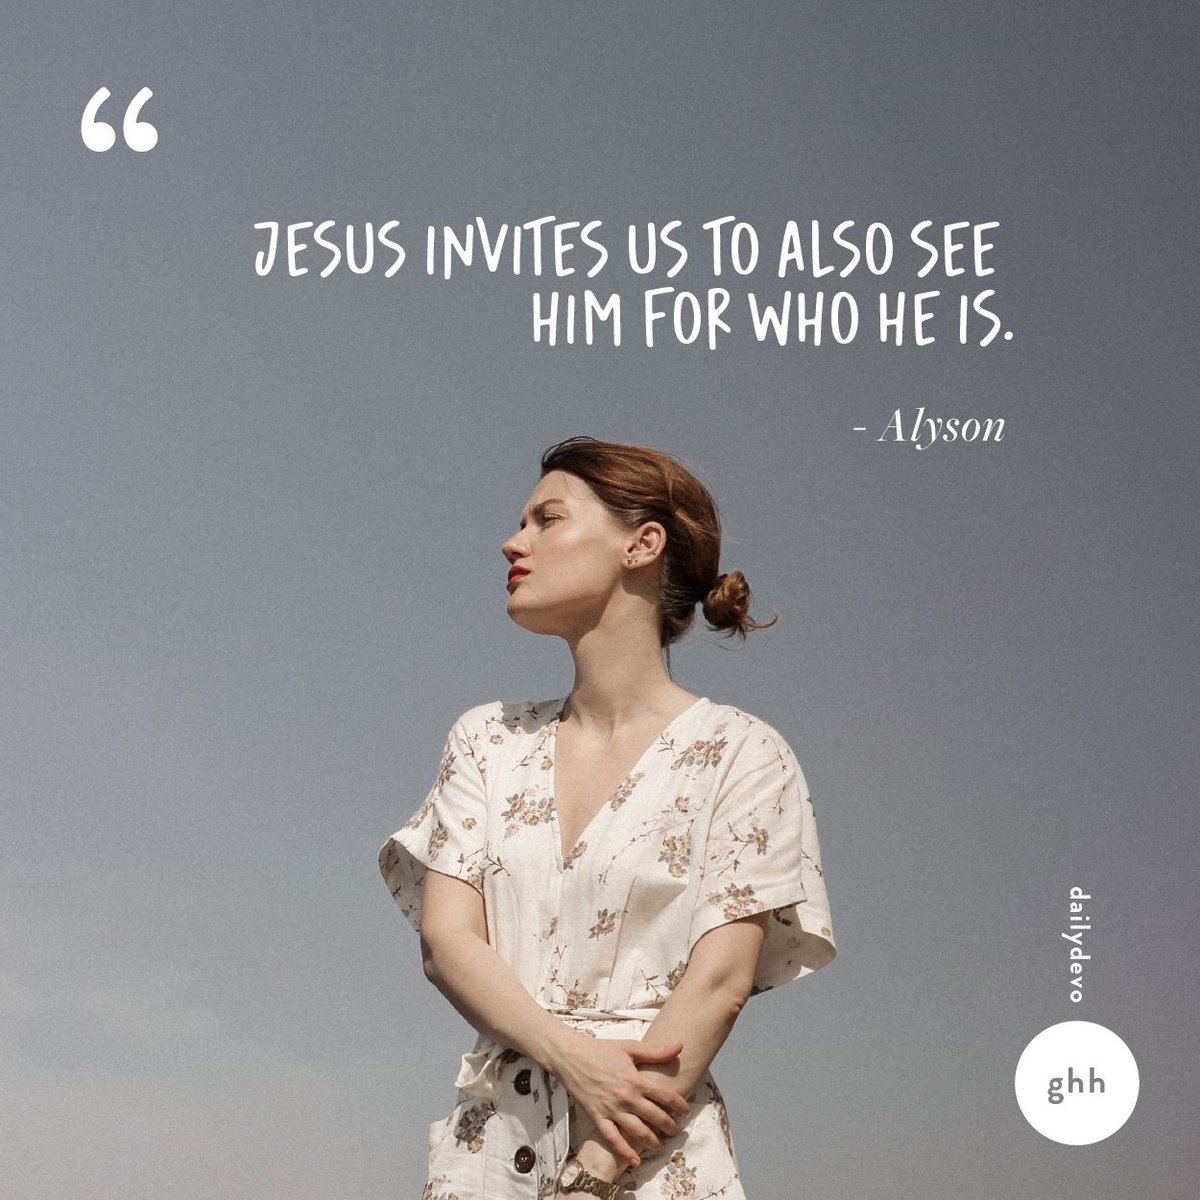 Jesus invites us to also see Him for who He is. When we do, like a child overflowing with joy, we can’t help but revel in His presence. - Alyson

#godhearsher
#dailydevo